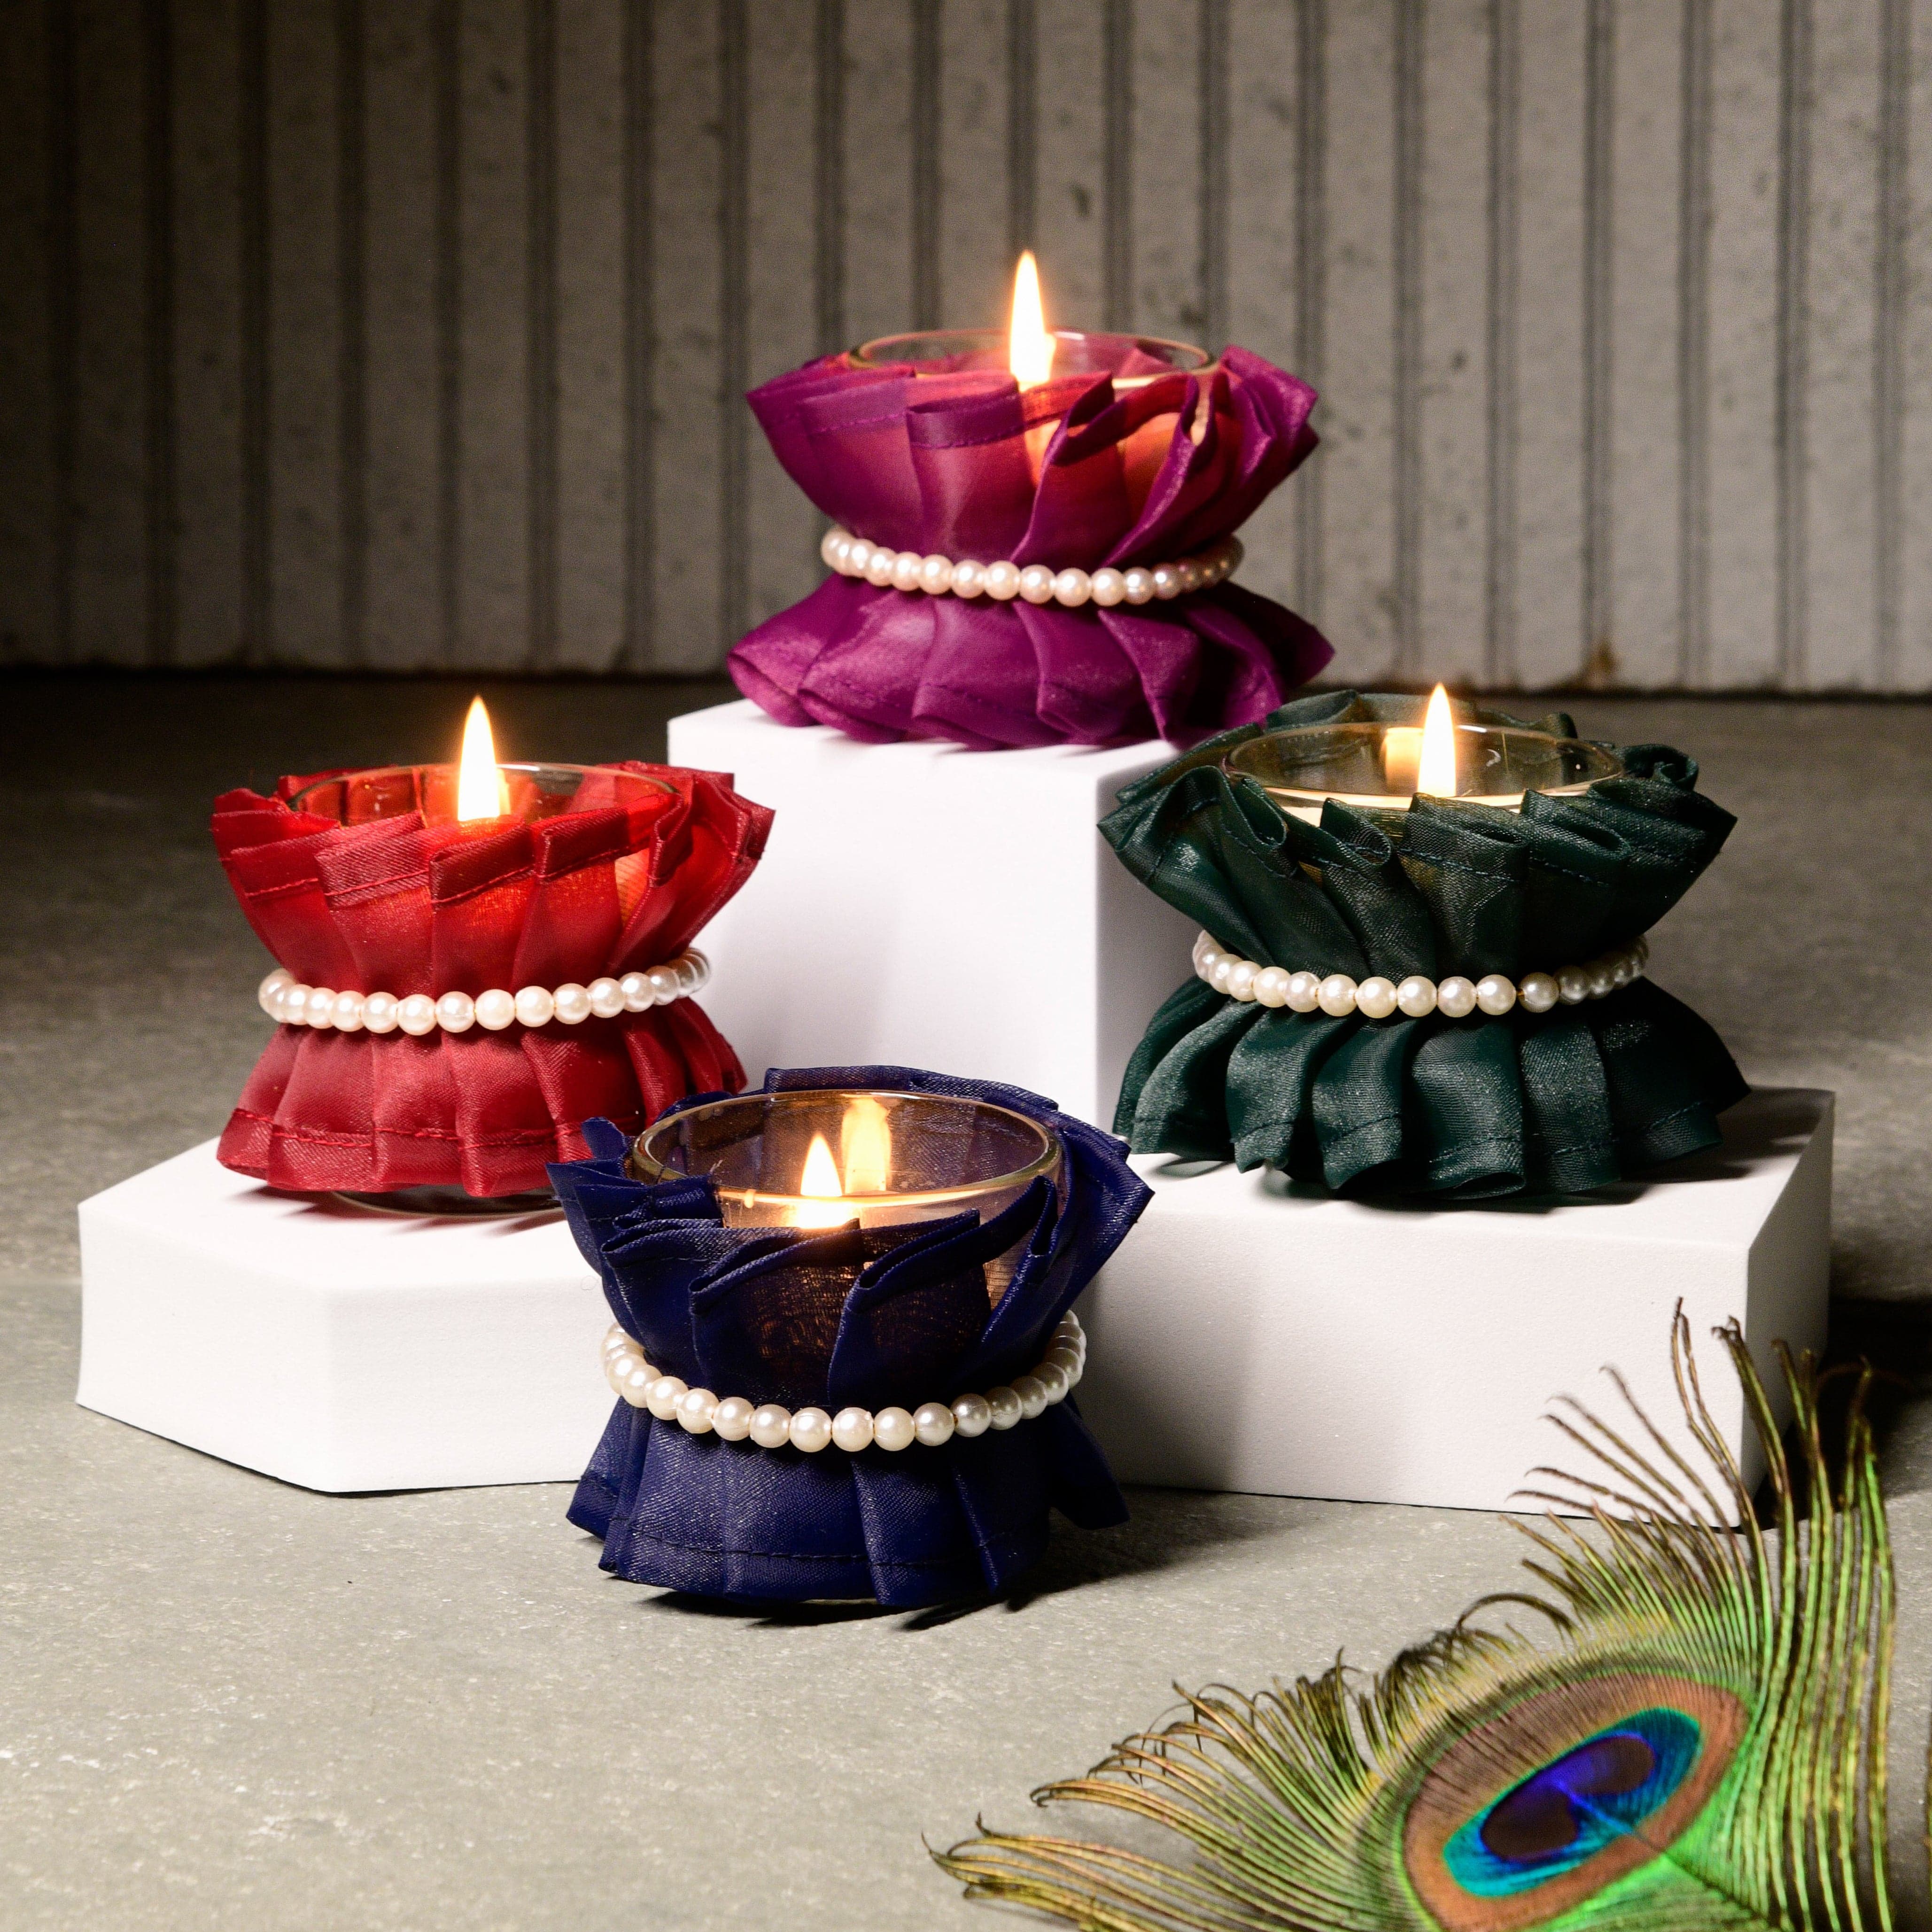 Mayur - Set of 4 Scented Votive Candles